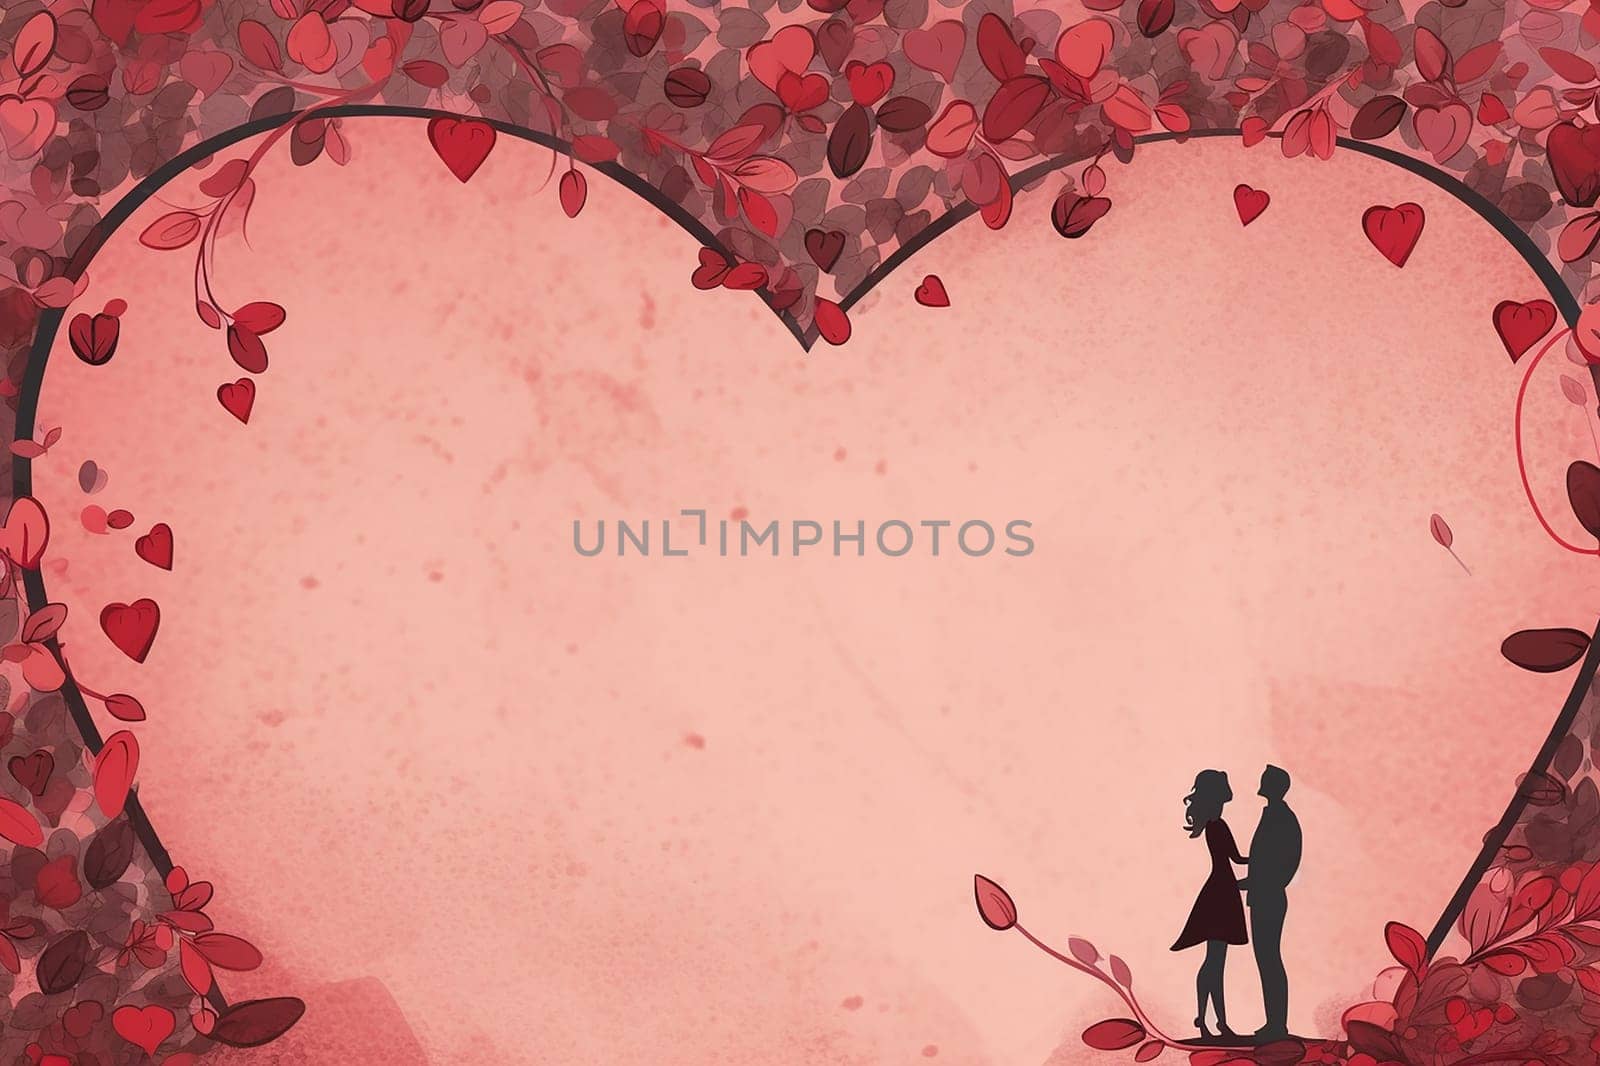 Silhouetted couple kissing under heart-shaped tree adorned with red leaves. by Hype2art